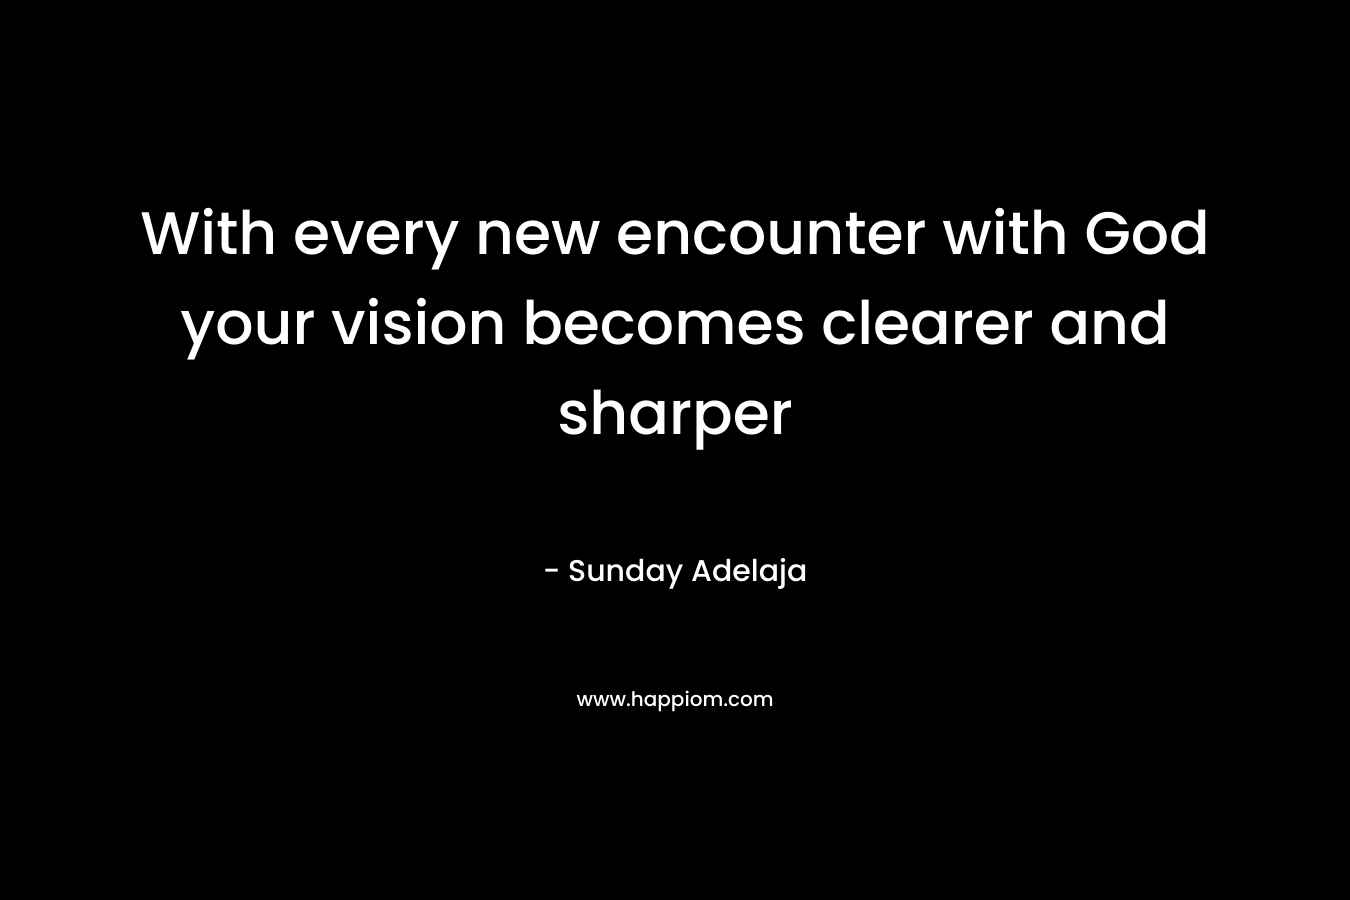 With every new encounter with God your vision becomes clearer and sharper